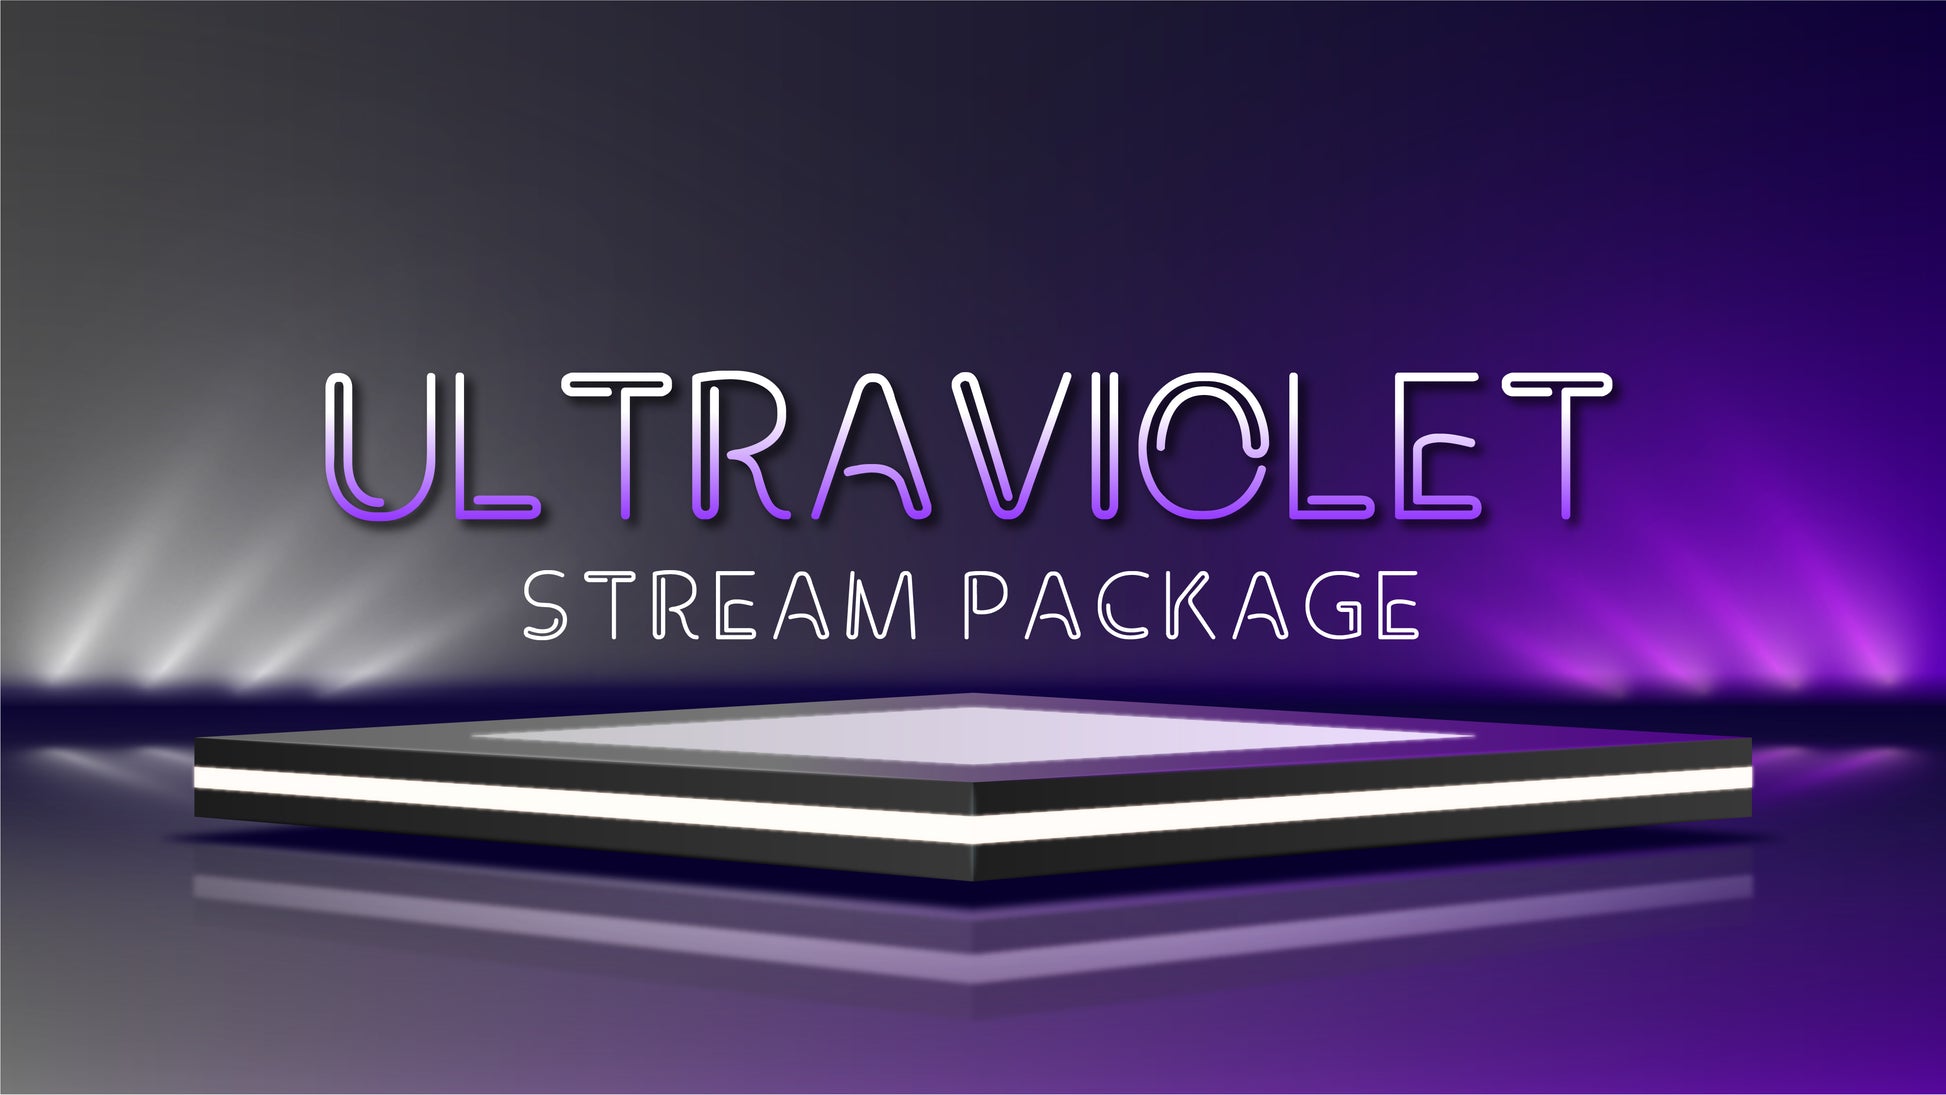 Animated stream overlay package Ultraviolet thumbnail stream designz